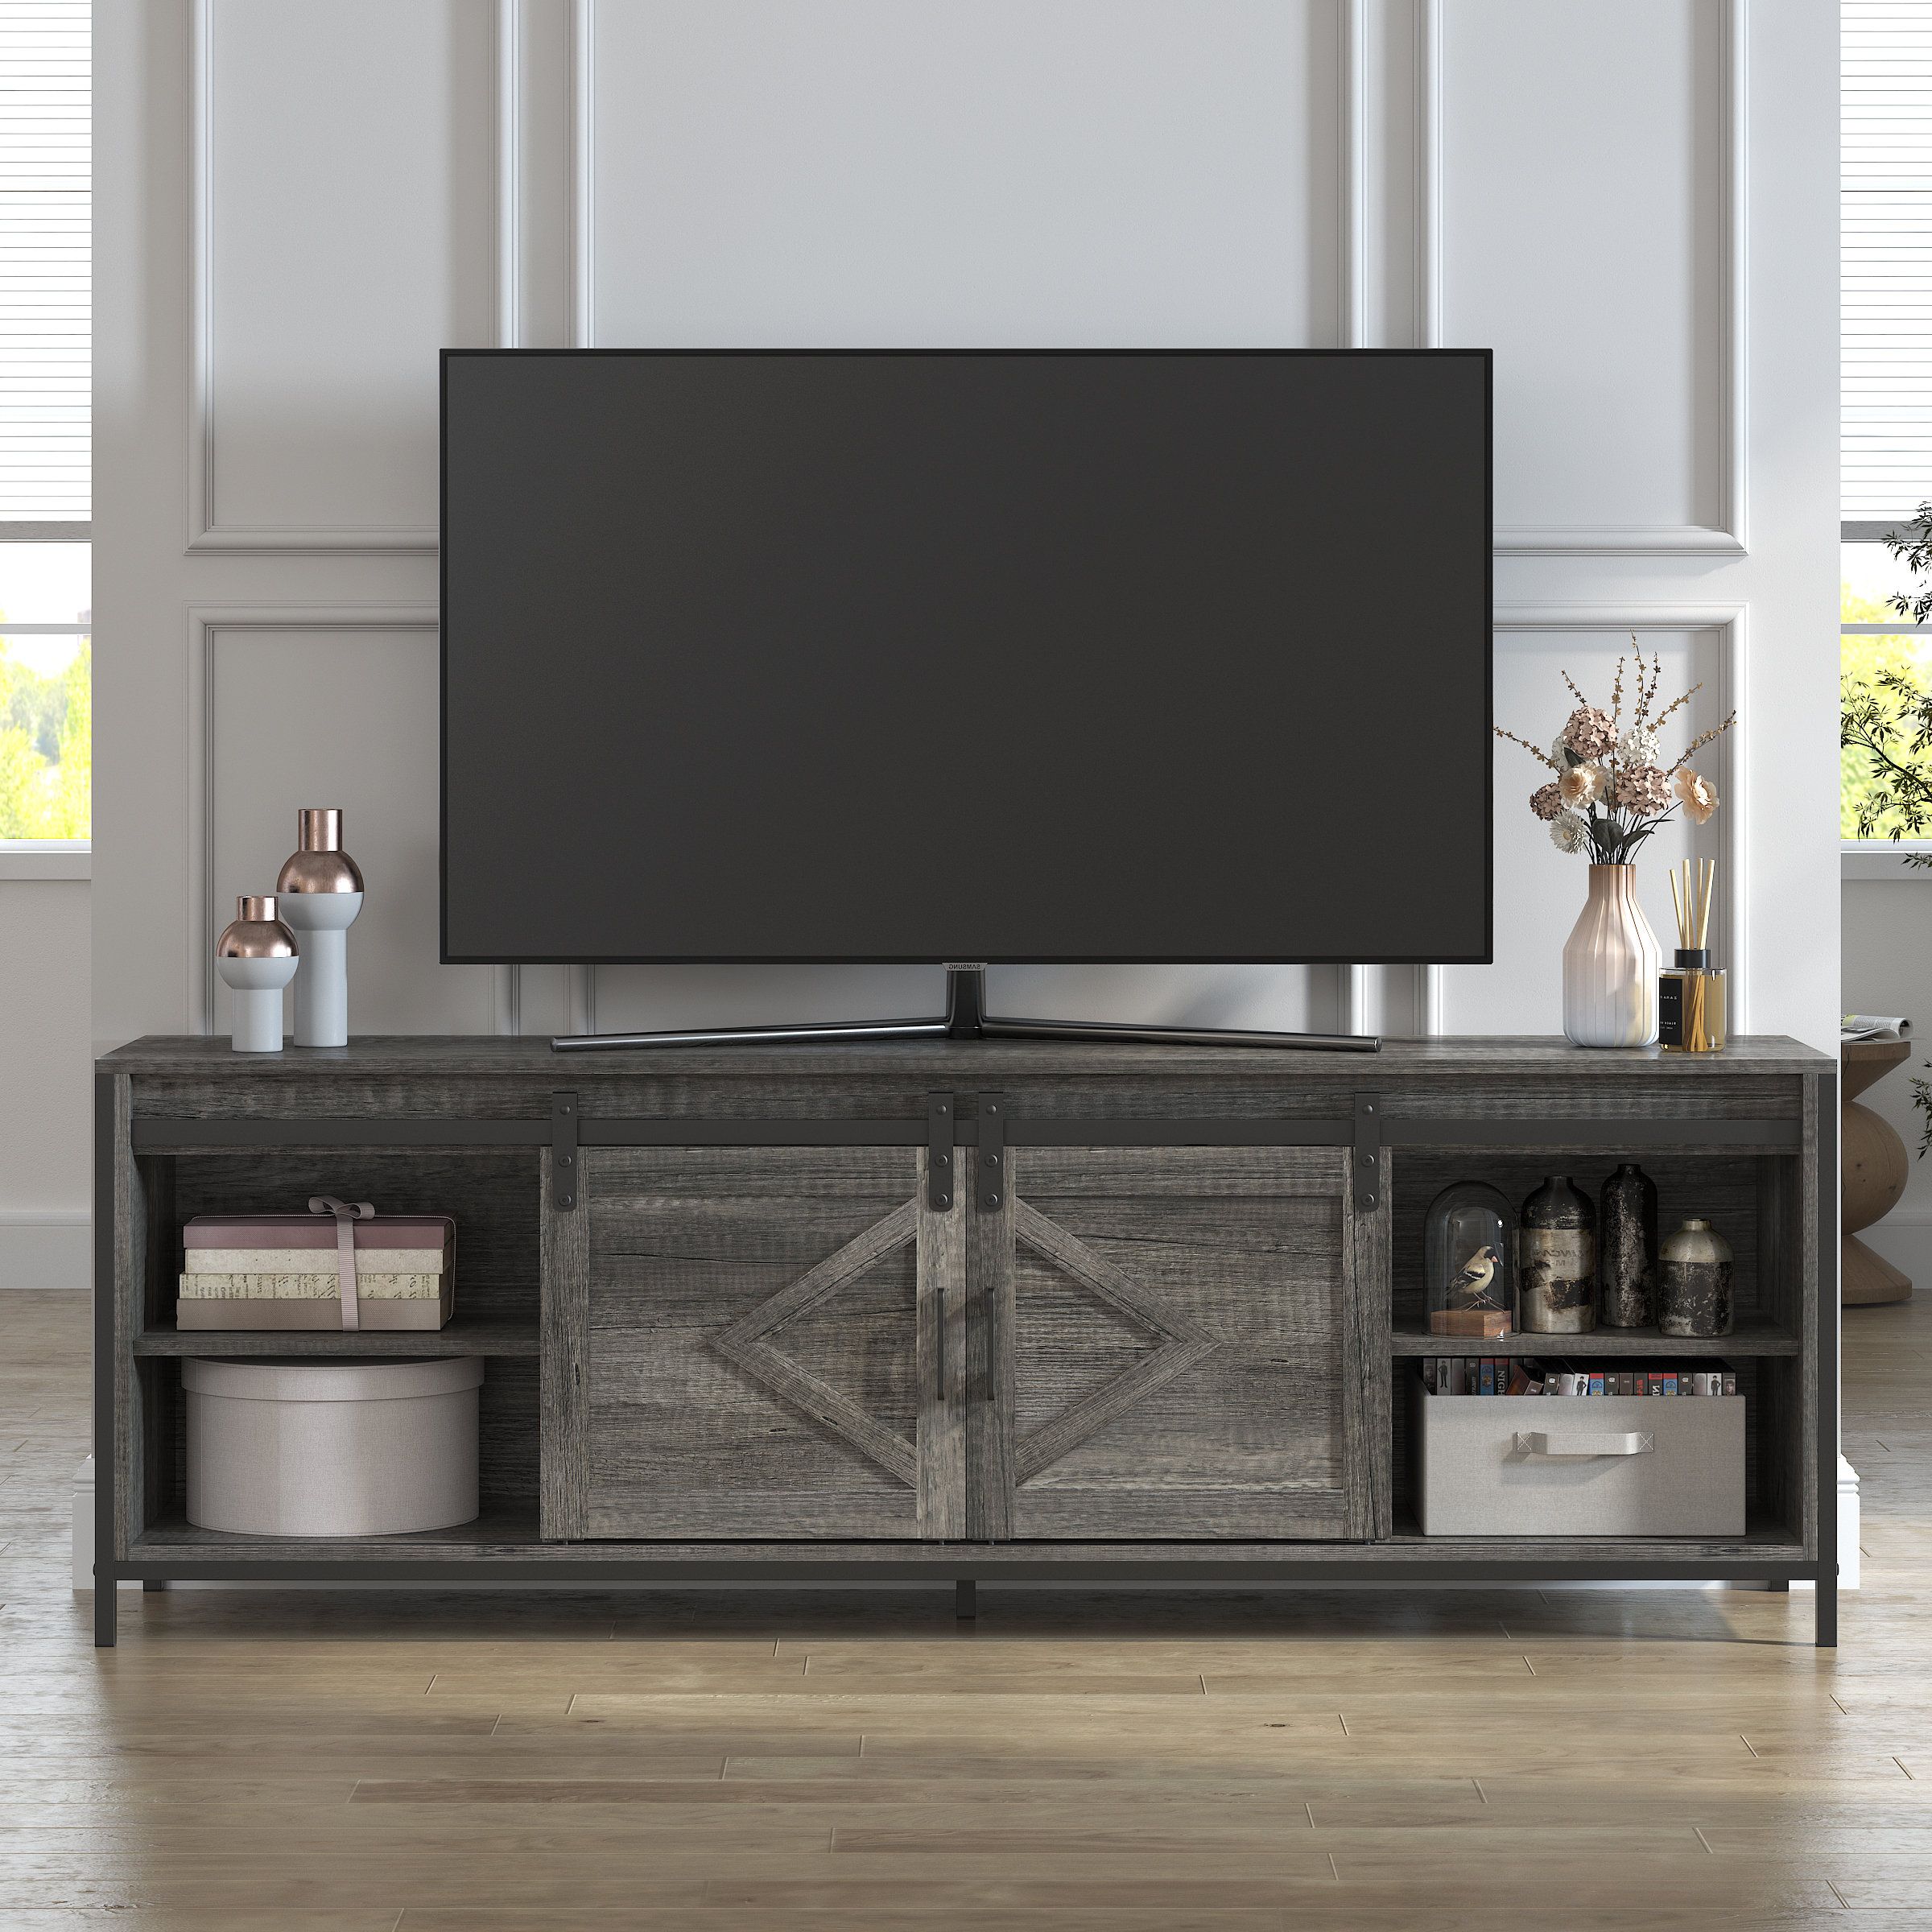 Gracie Oaks 60 Inches Modern Farmhouse Barn Door Tv Stand Up To 70" |  Wayfair Intended For Modern Farmhouse Barn Tv Stands (View 14 of 20)